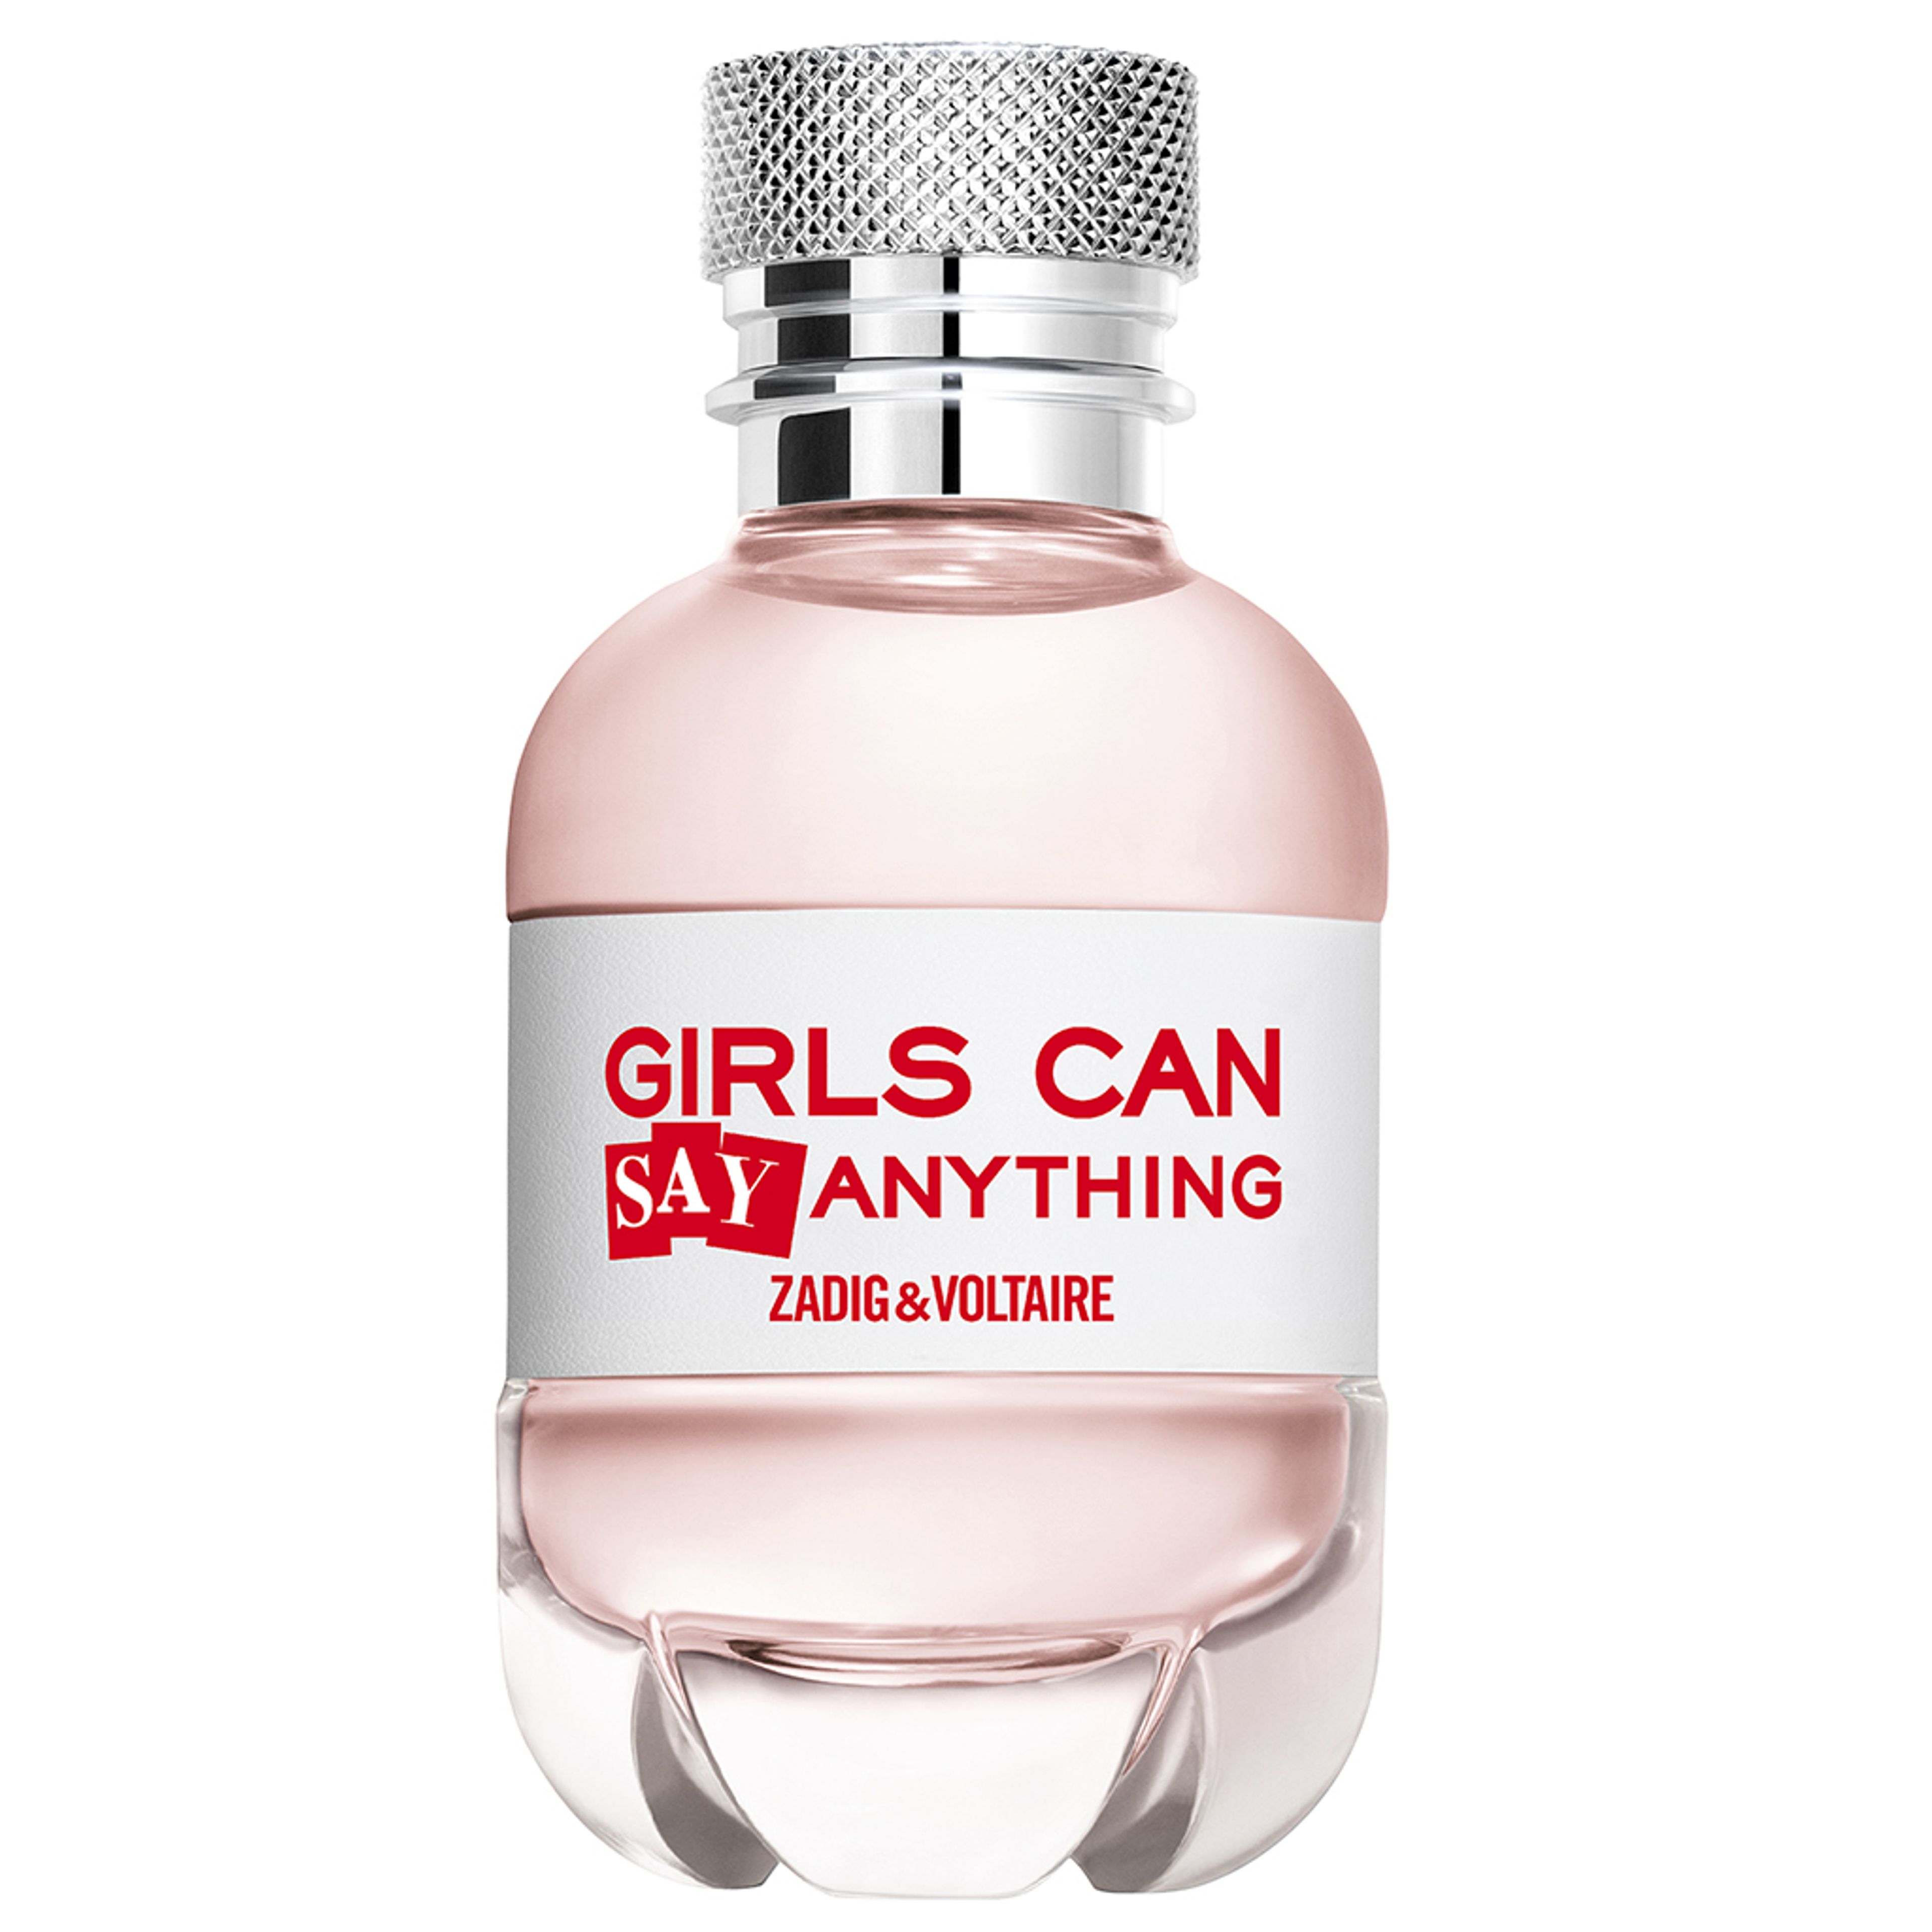 Zadig & Voltaire Girls Can Say Anything Eau De Parfum 1